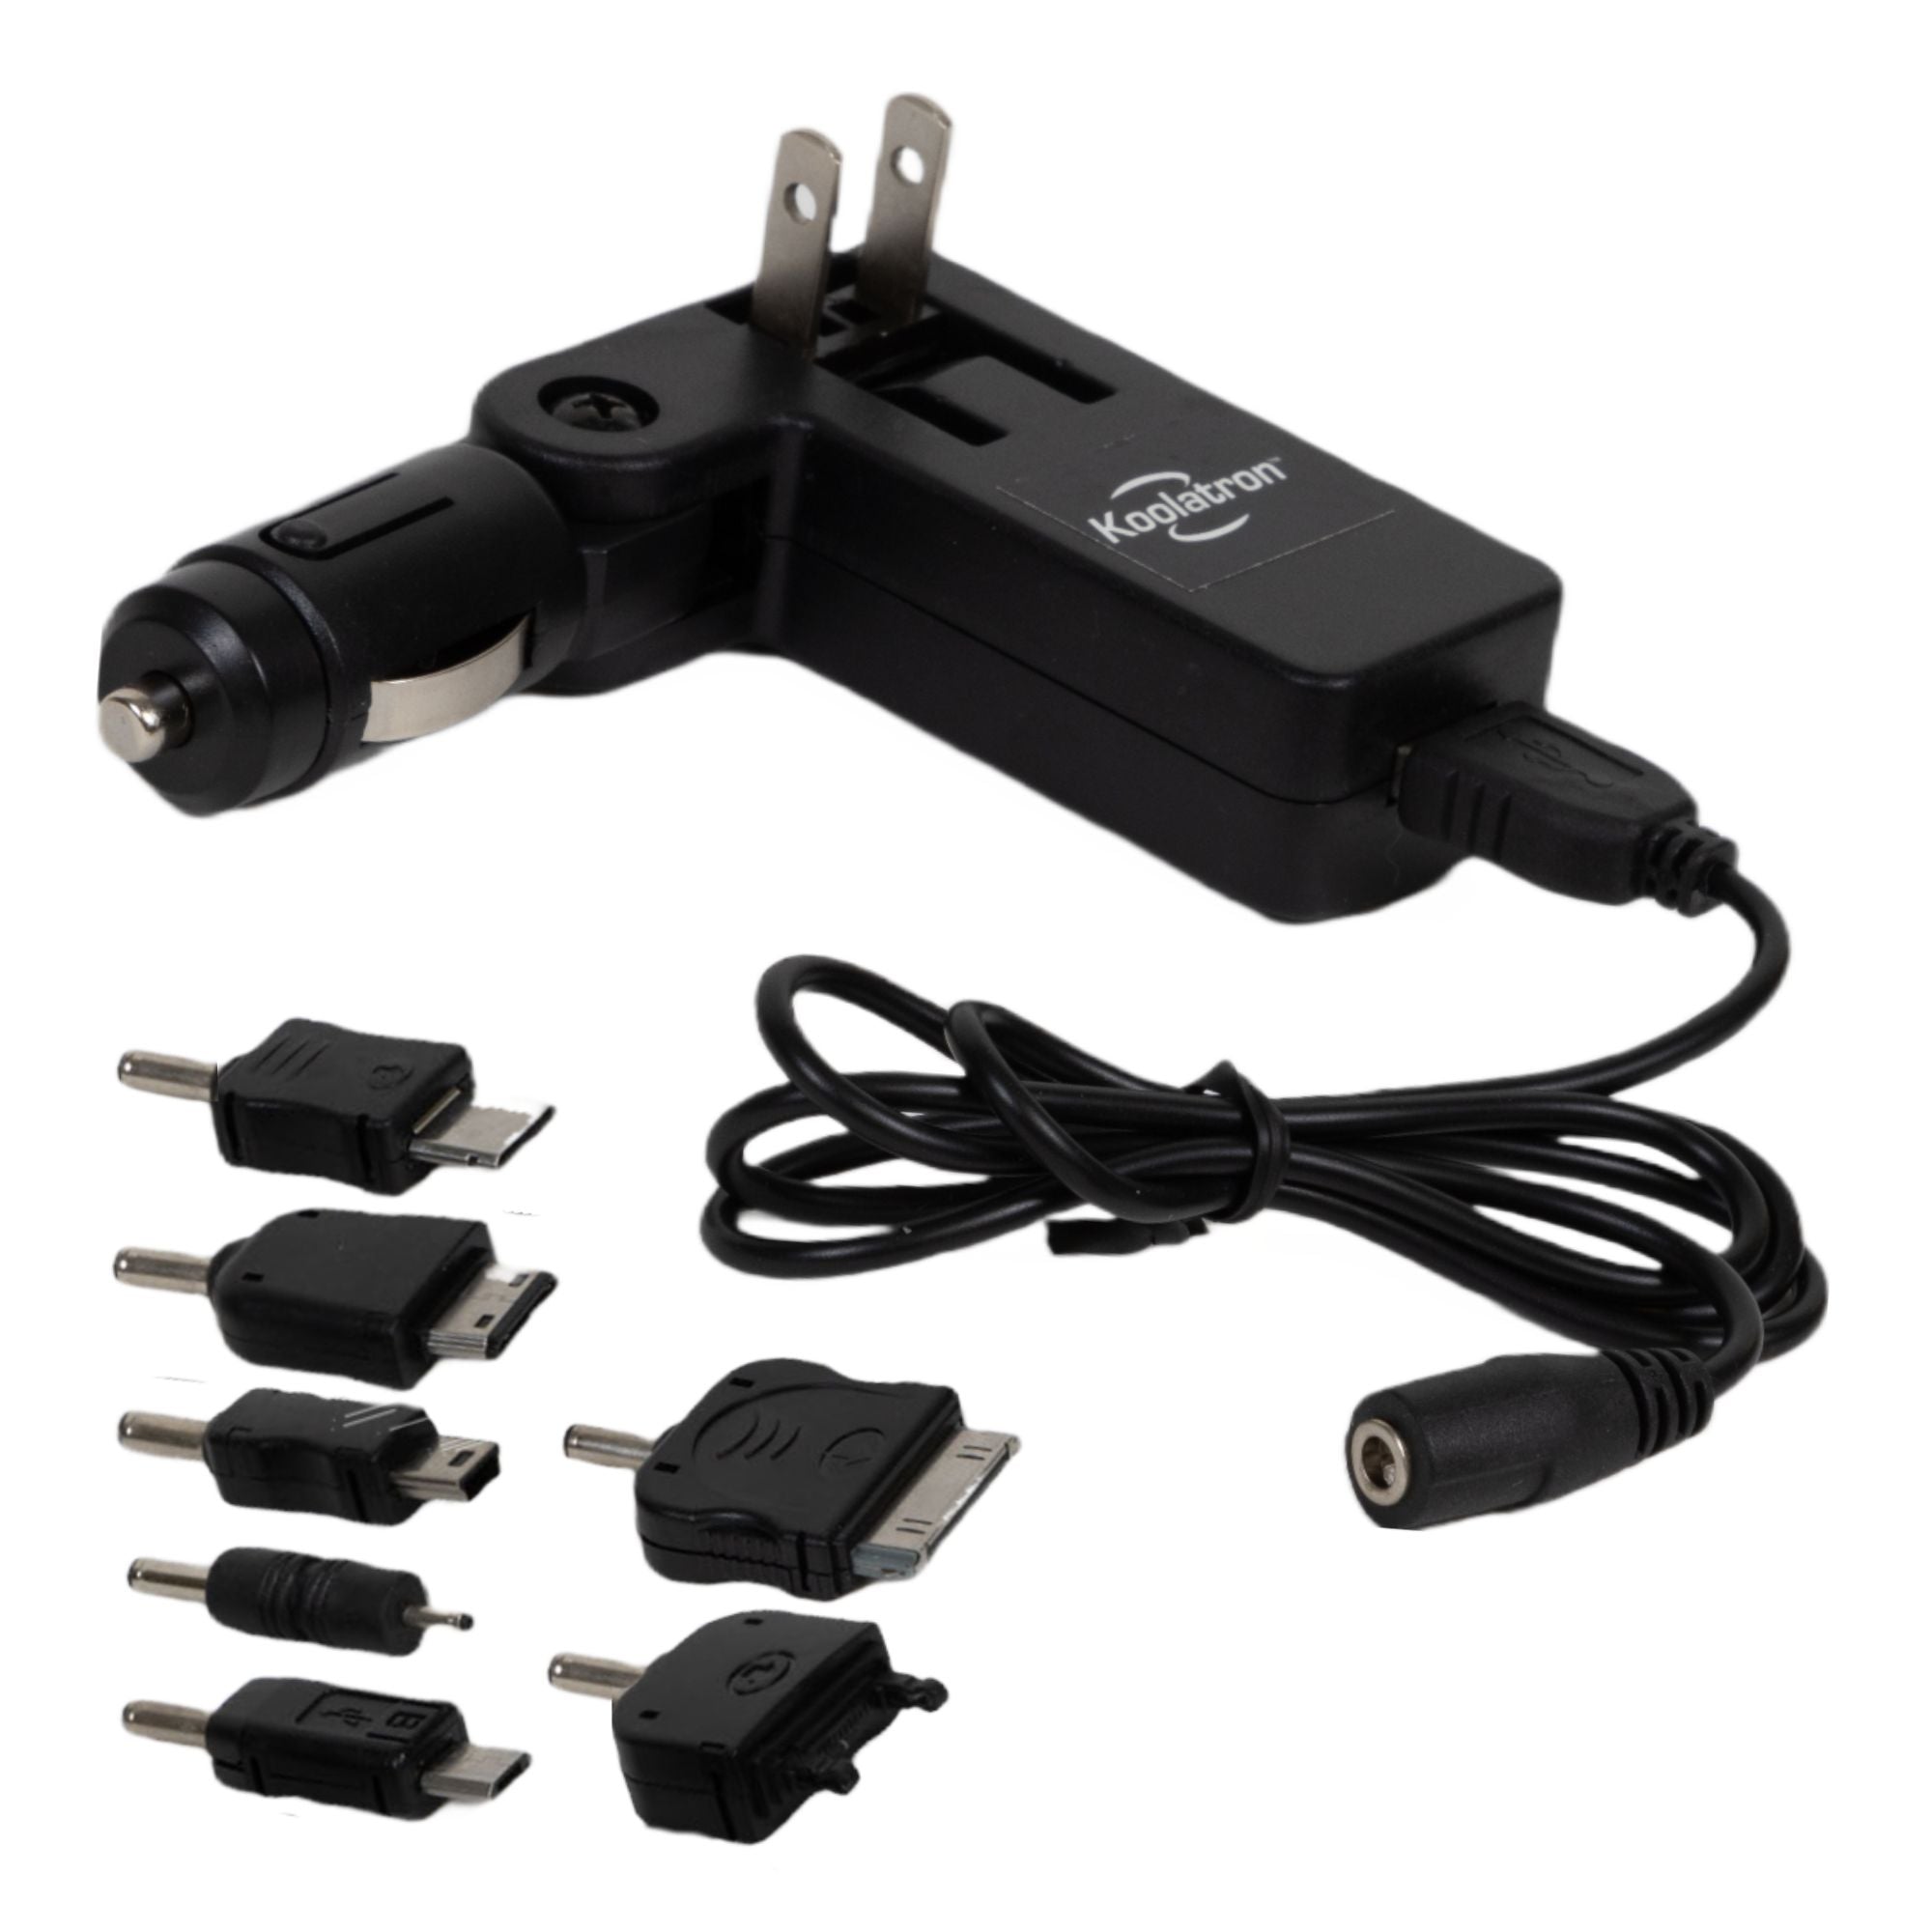 Product shot of cell phone charger with AC prongs and 12V plug expanded on a white background with USB cord plugged in and 7 socket adapters below